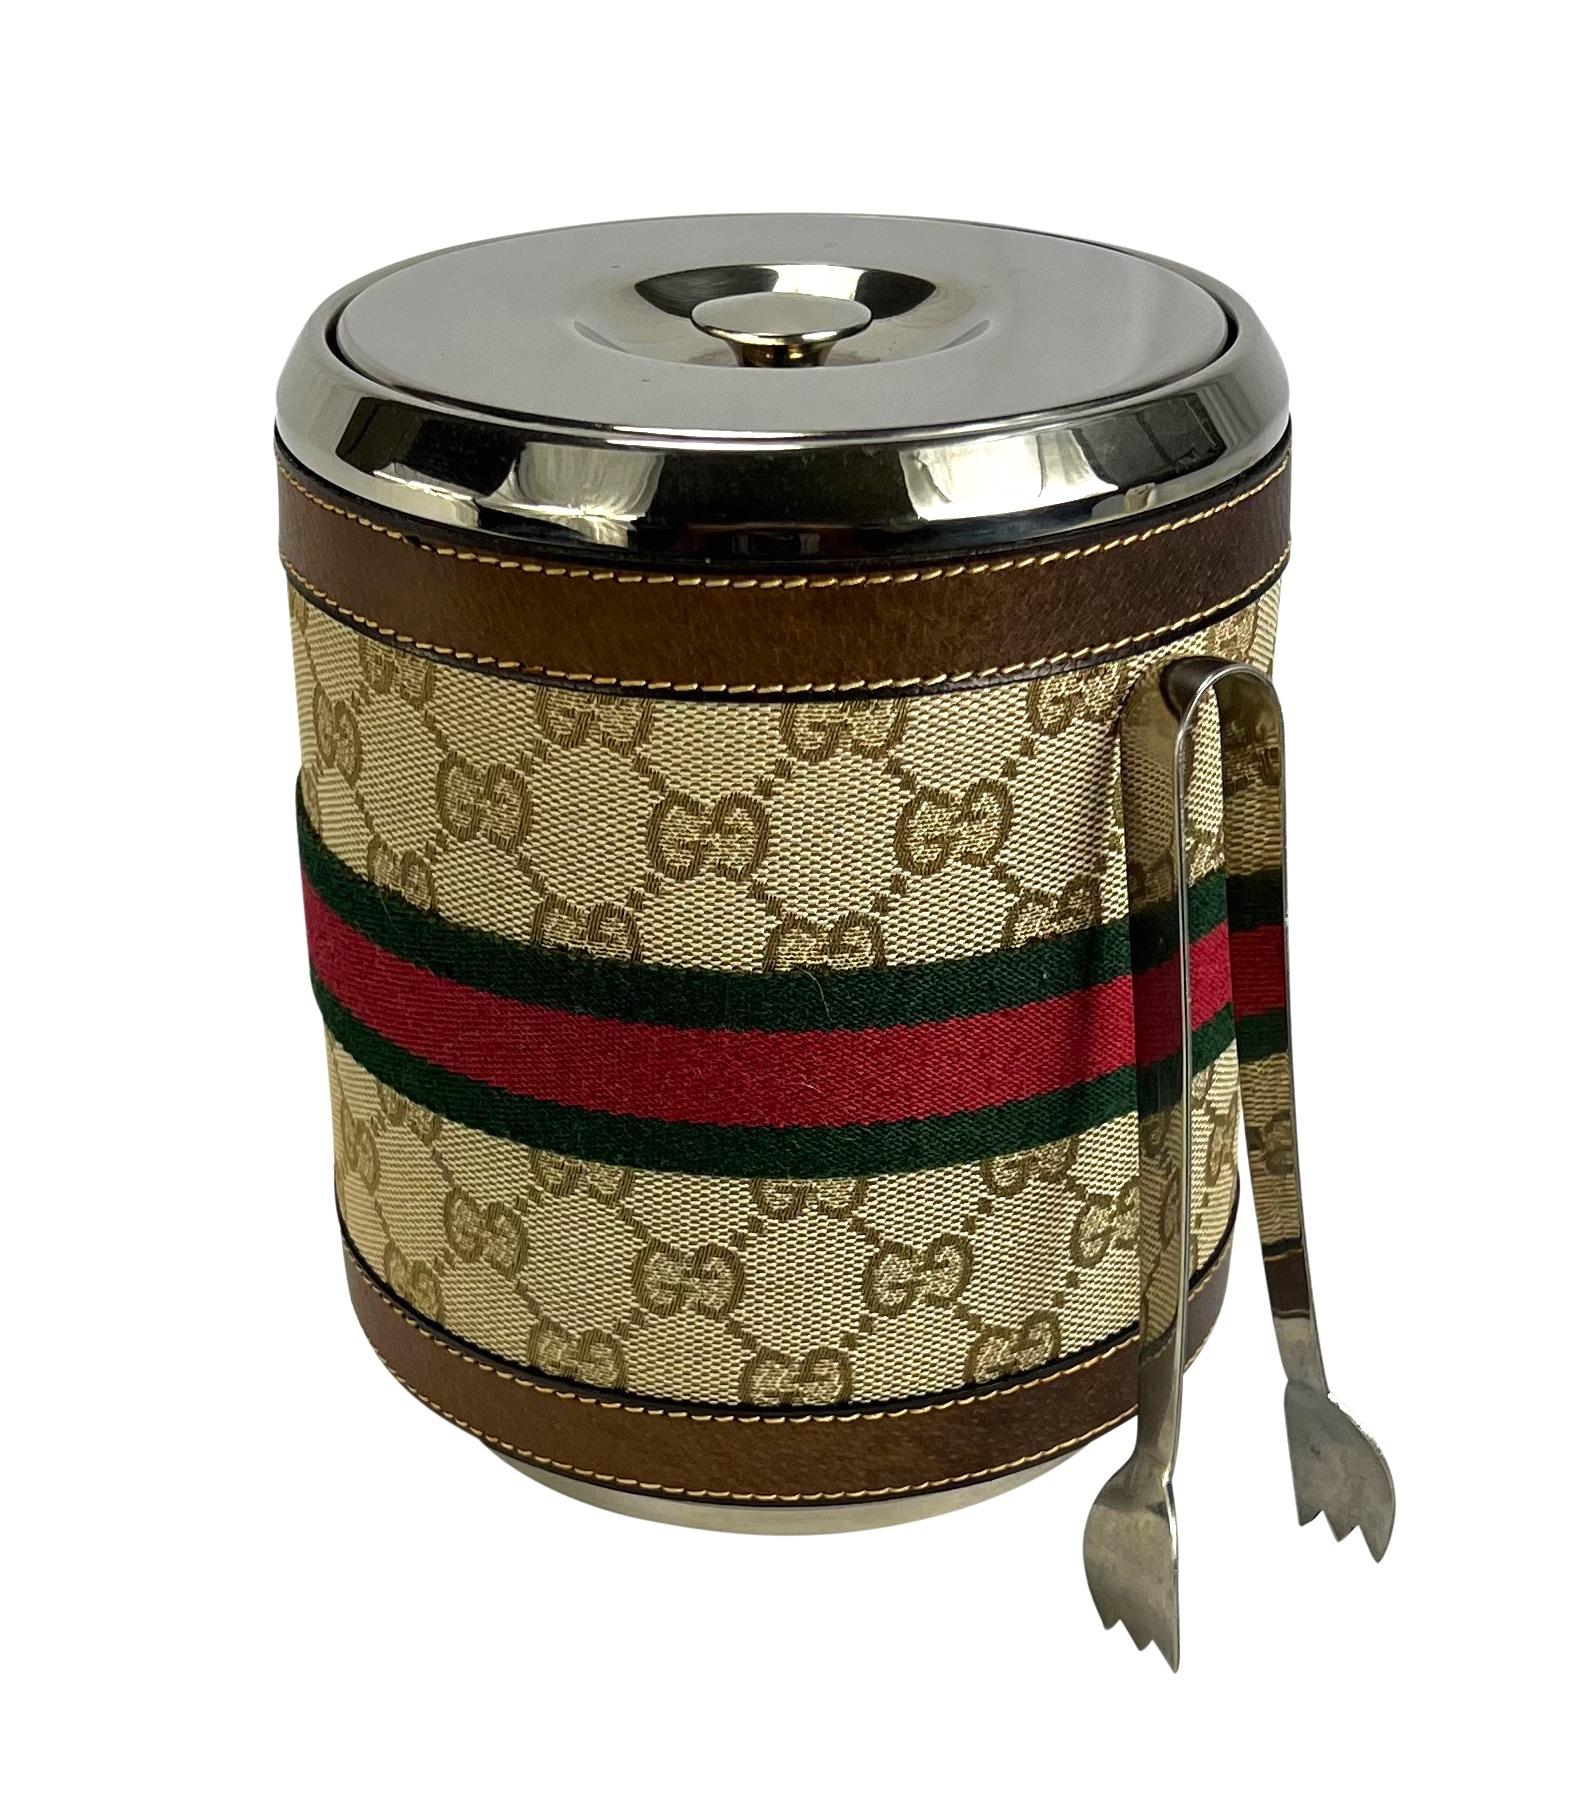 TheRealList presents: an incredible Gucci 'GG' monogram ice bucket. From the 1980s, this ice bucket is covered in brown leather and Gucci's iconic 'GG' monogram canvas. This fabulous ice bucket features stainless steel details and is made complete